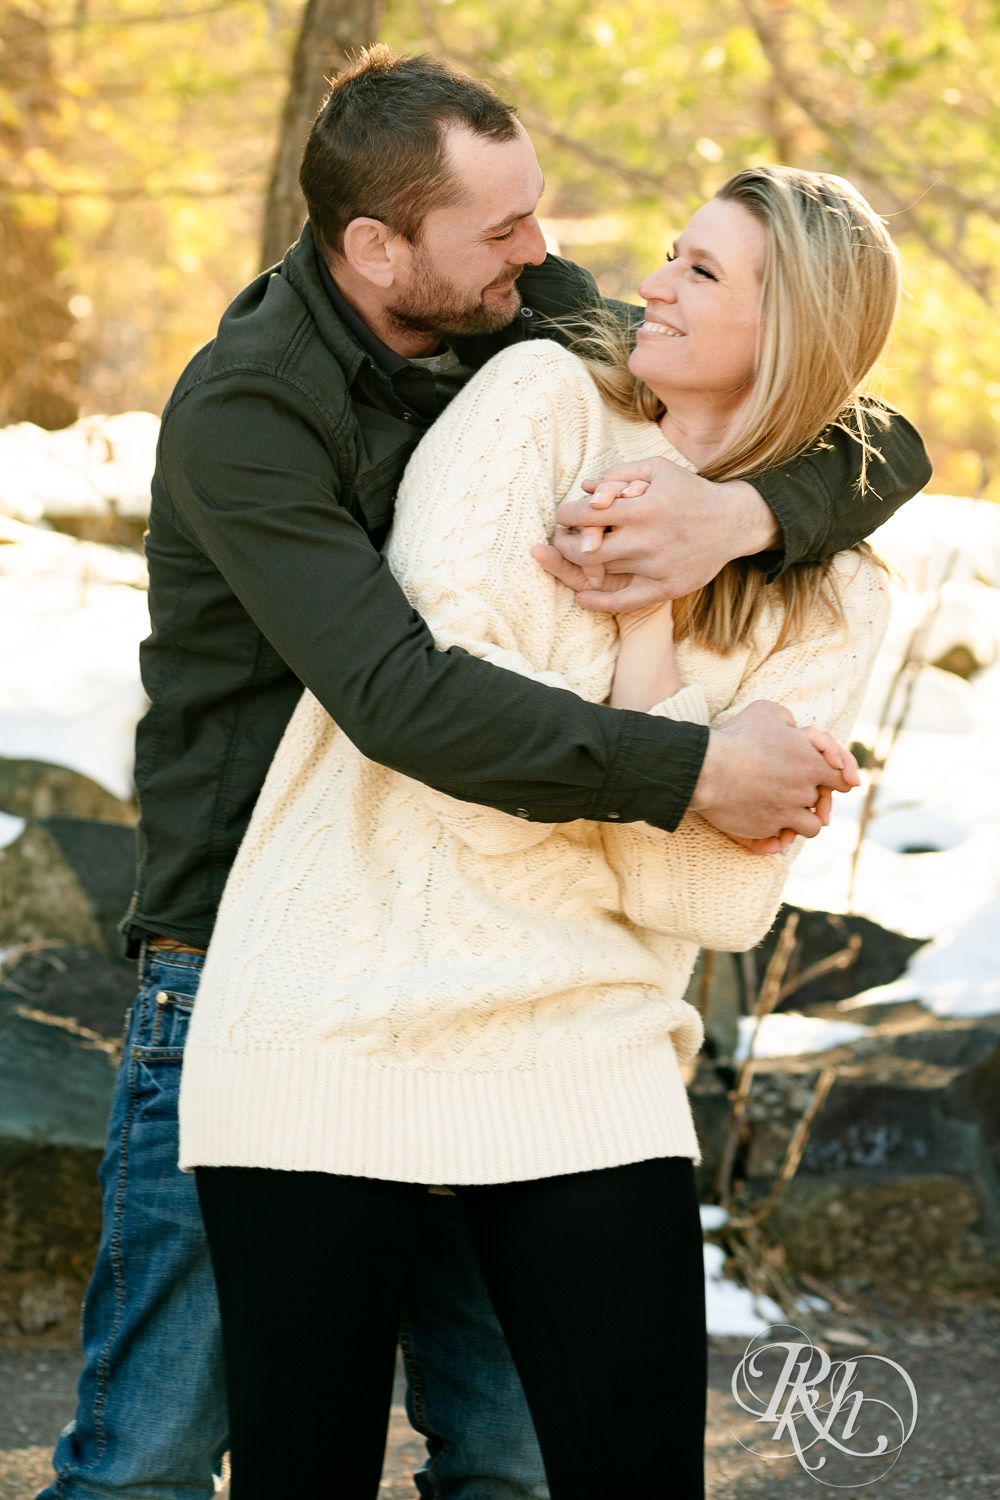 Man in jeans and green shirt and woman in a white sweater smile laugh at winter engagement photography session in Taylors Falls, Minnesota.